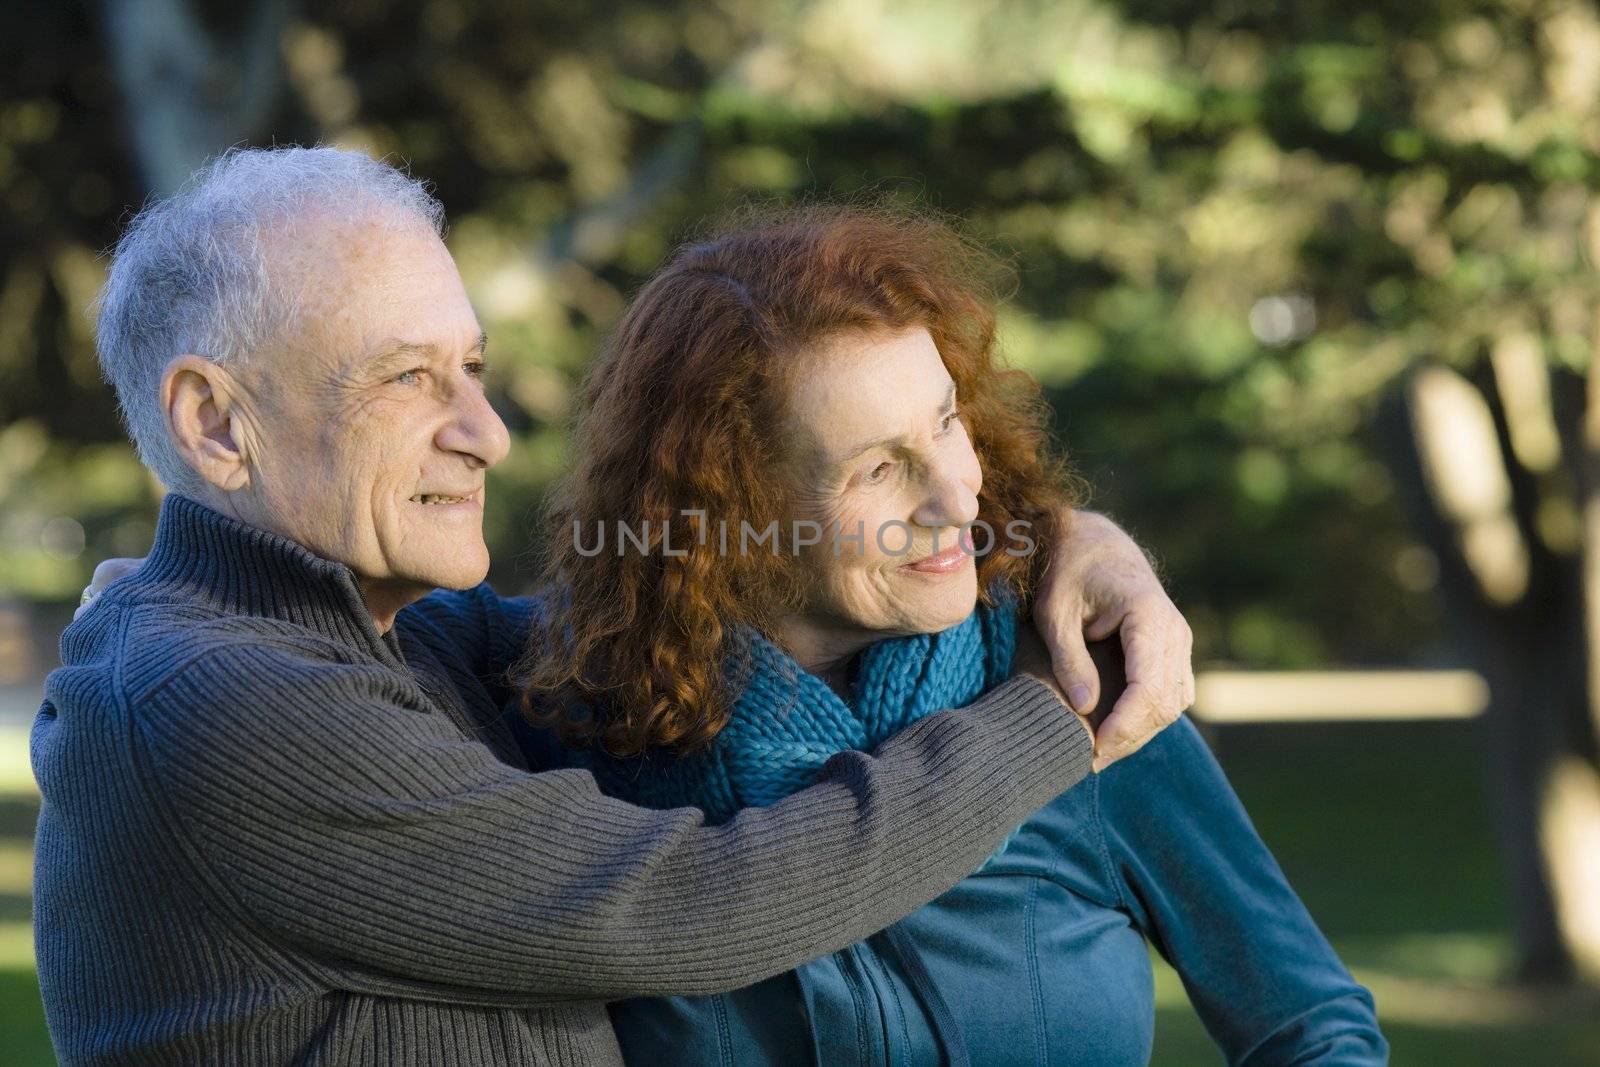 Smiling Senior Couple Holding Each Other in a Park